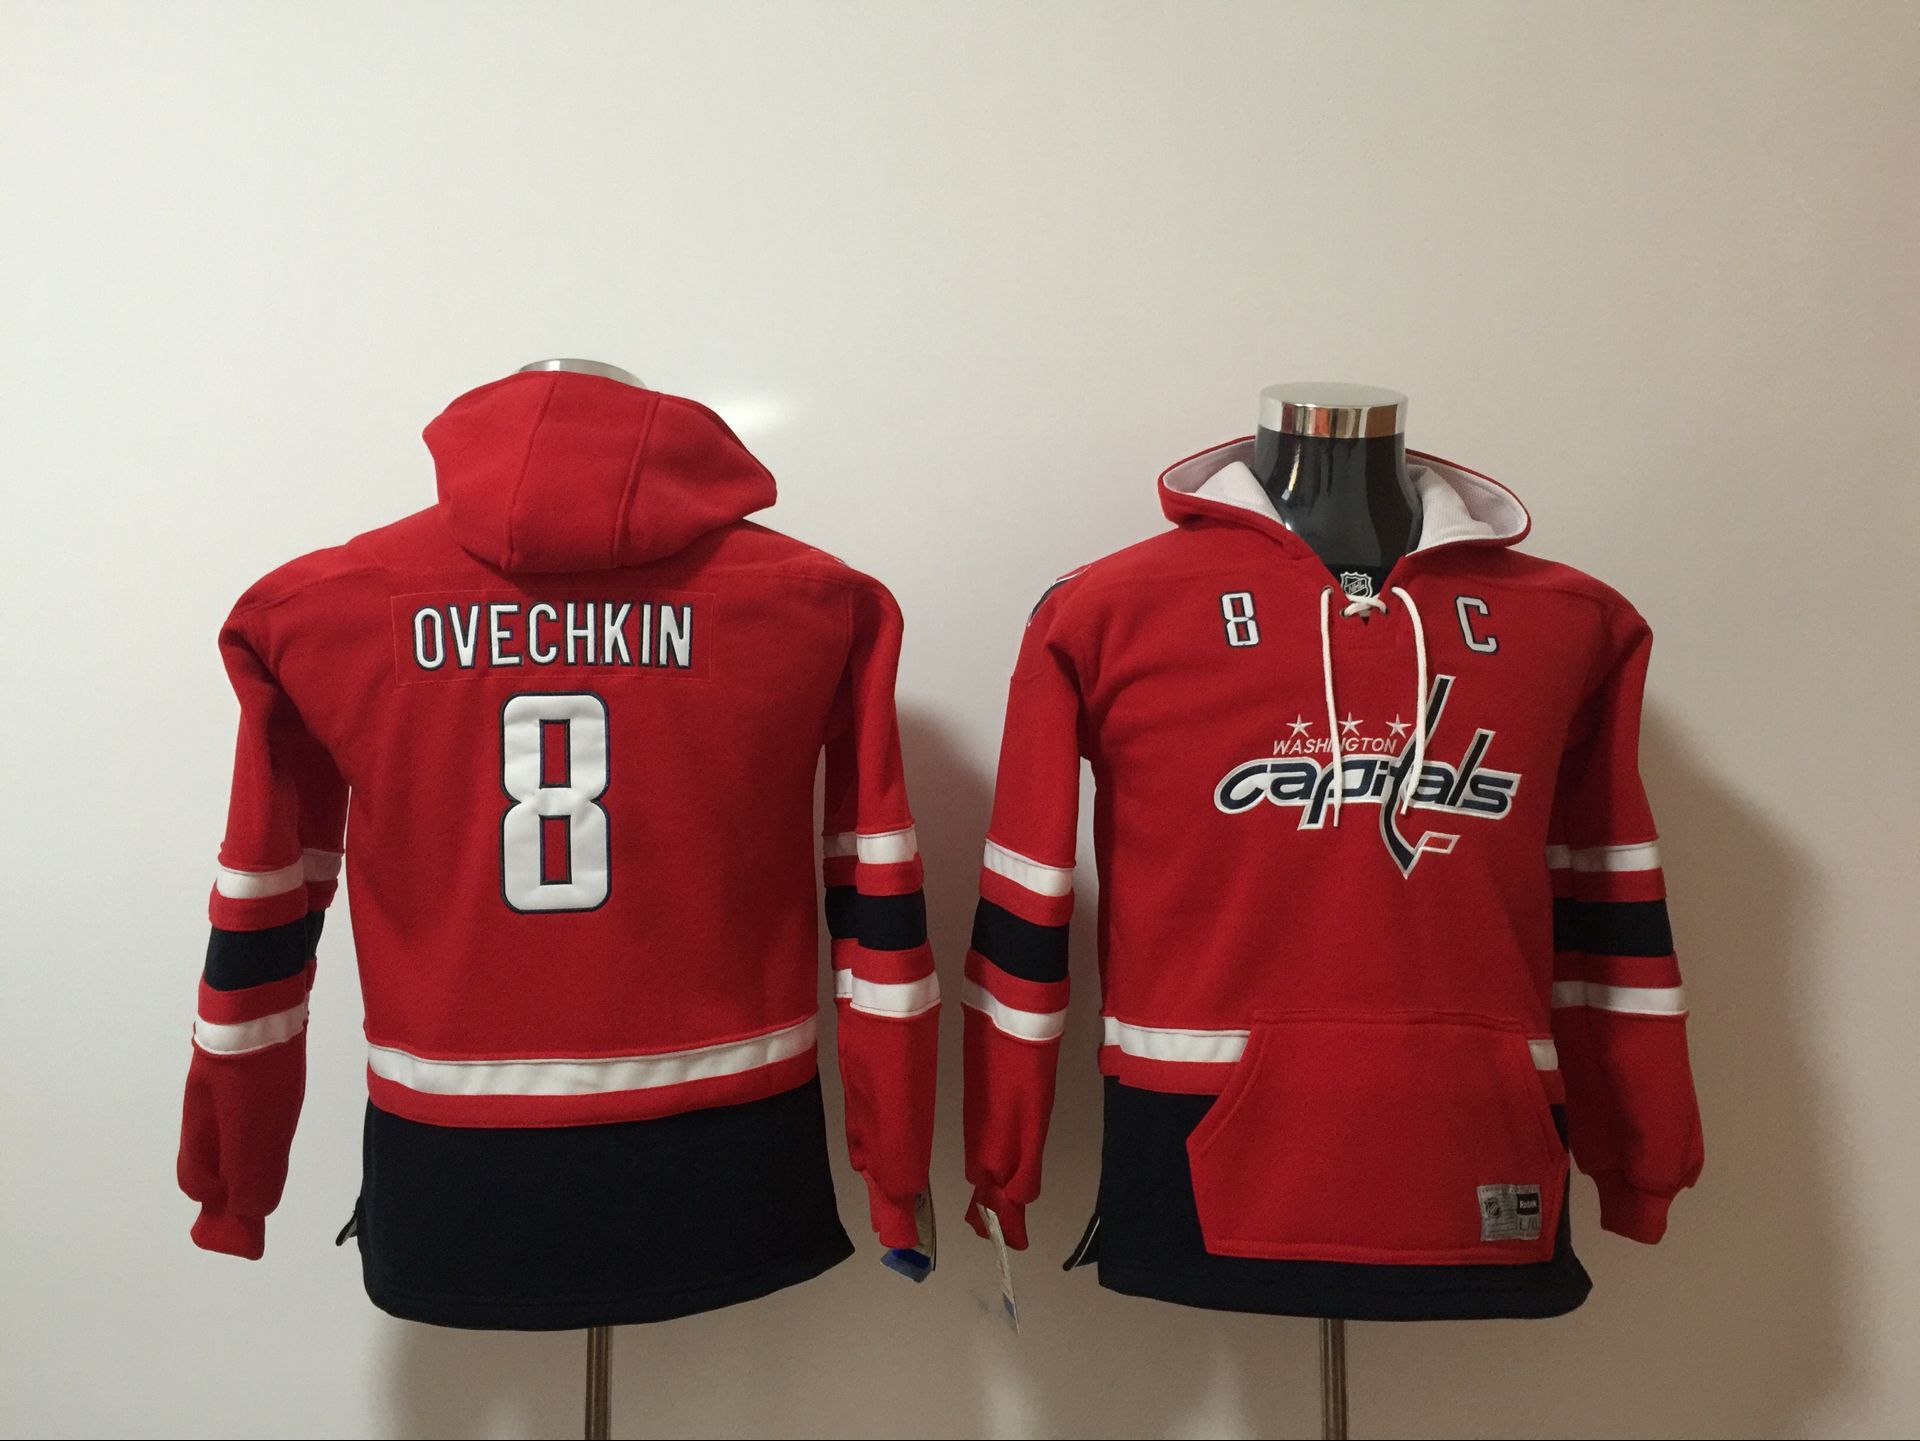 Youth 2017 NHL Washington Capitals #8 Ovechkin Red Hoodie->golden state warriors->NBA Jersey